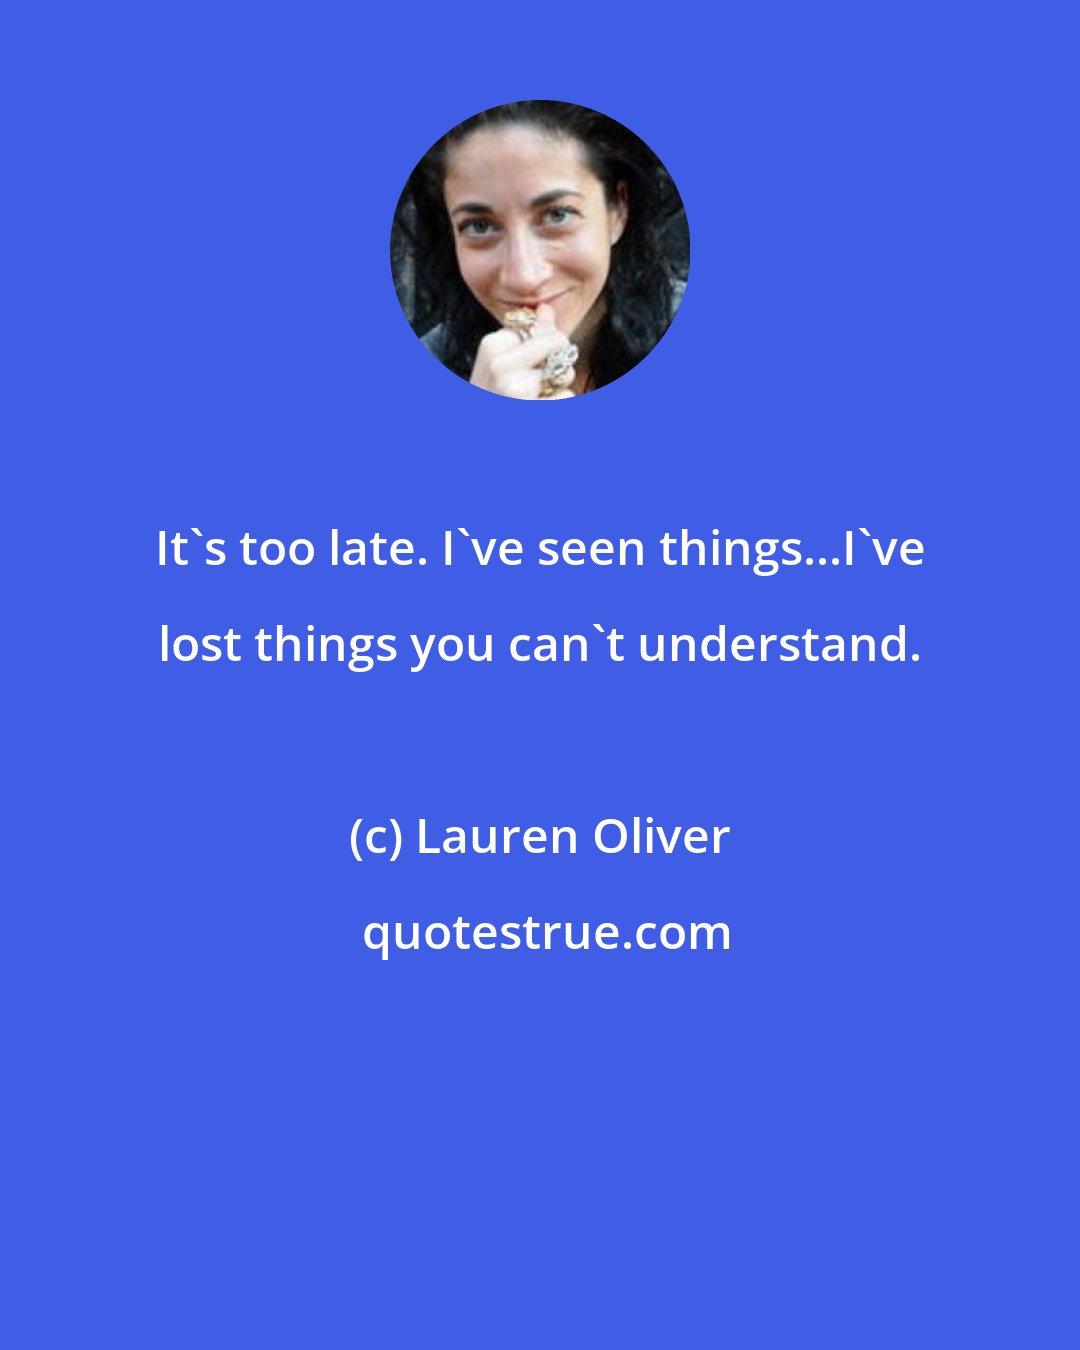 Lauren Oliver: It's too late. I've seen things...I've lost things you can't understand.